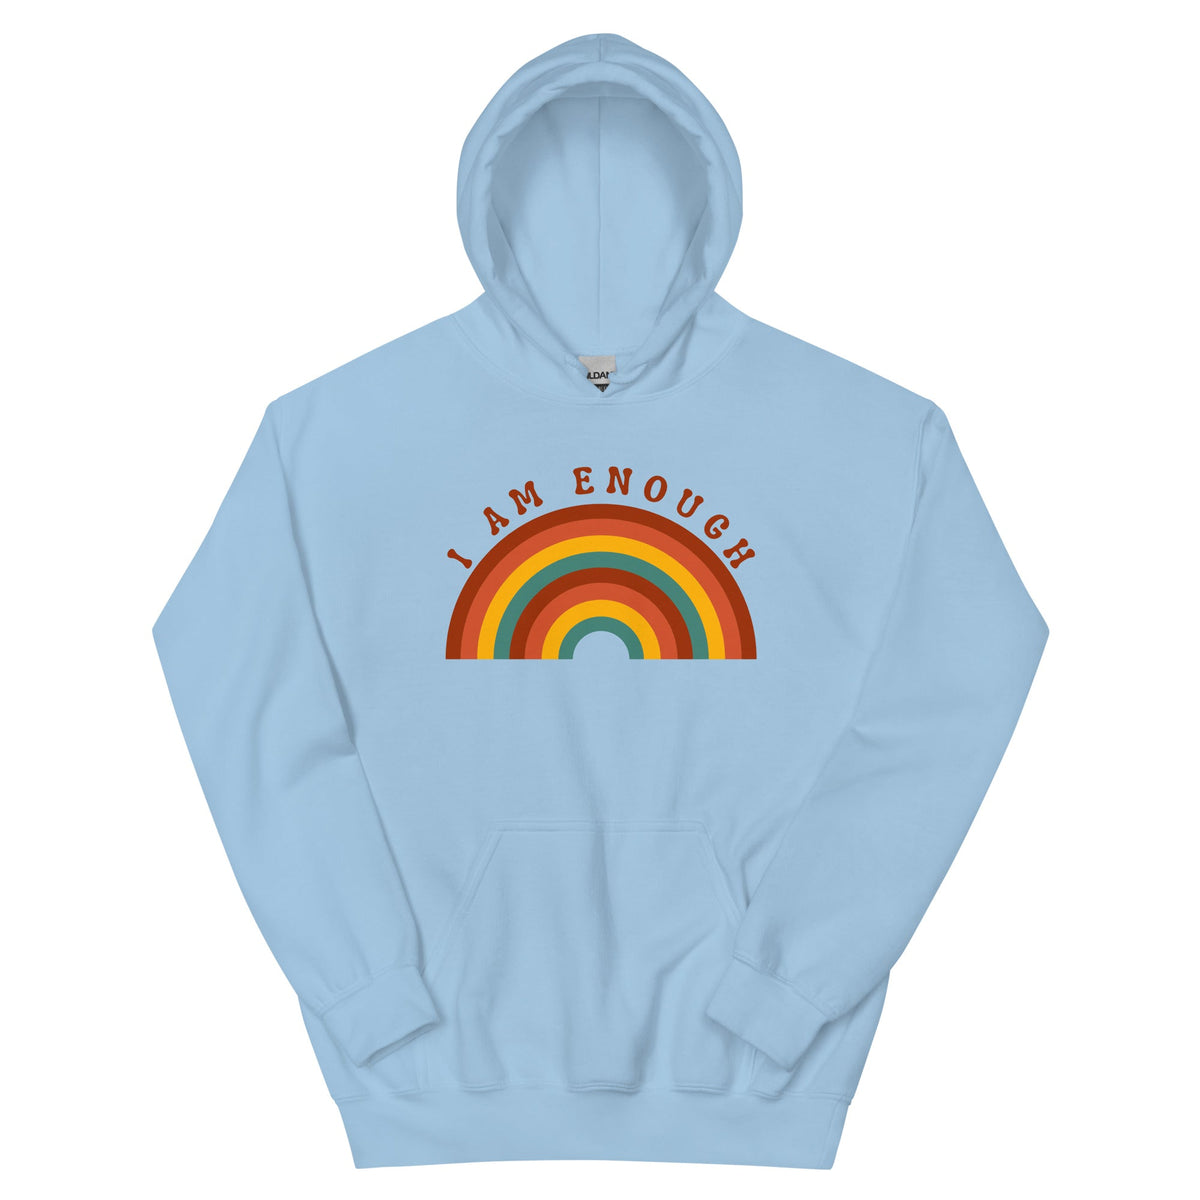 I AM ENOUGH RAINBOW - Motivational Hoodie for Women - 1